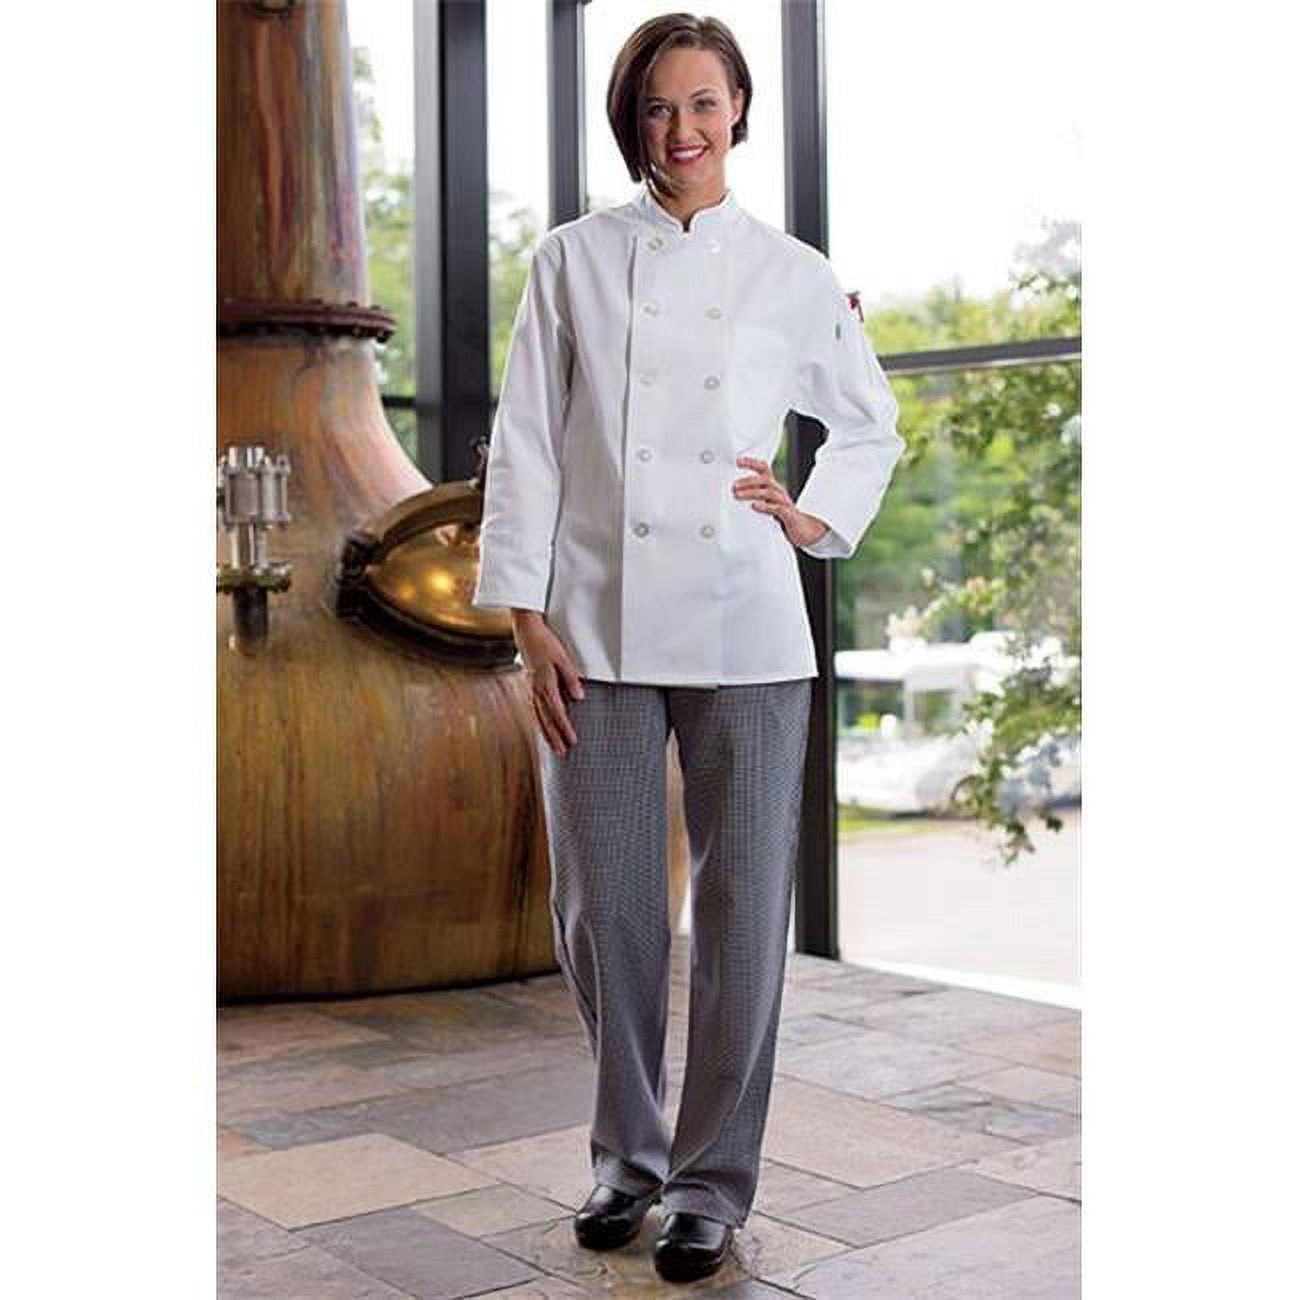 4101-4002 Women'S Chef Pant in Houndstooth - Small - image 1 of 6